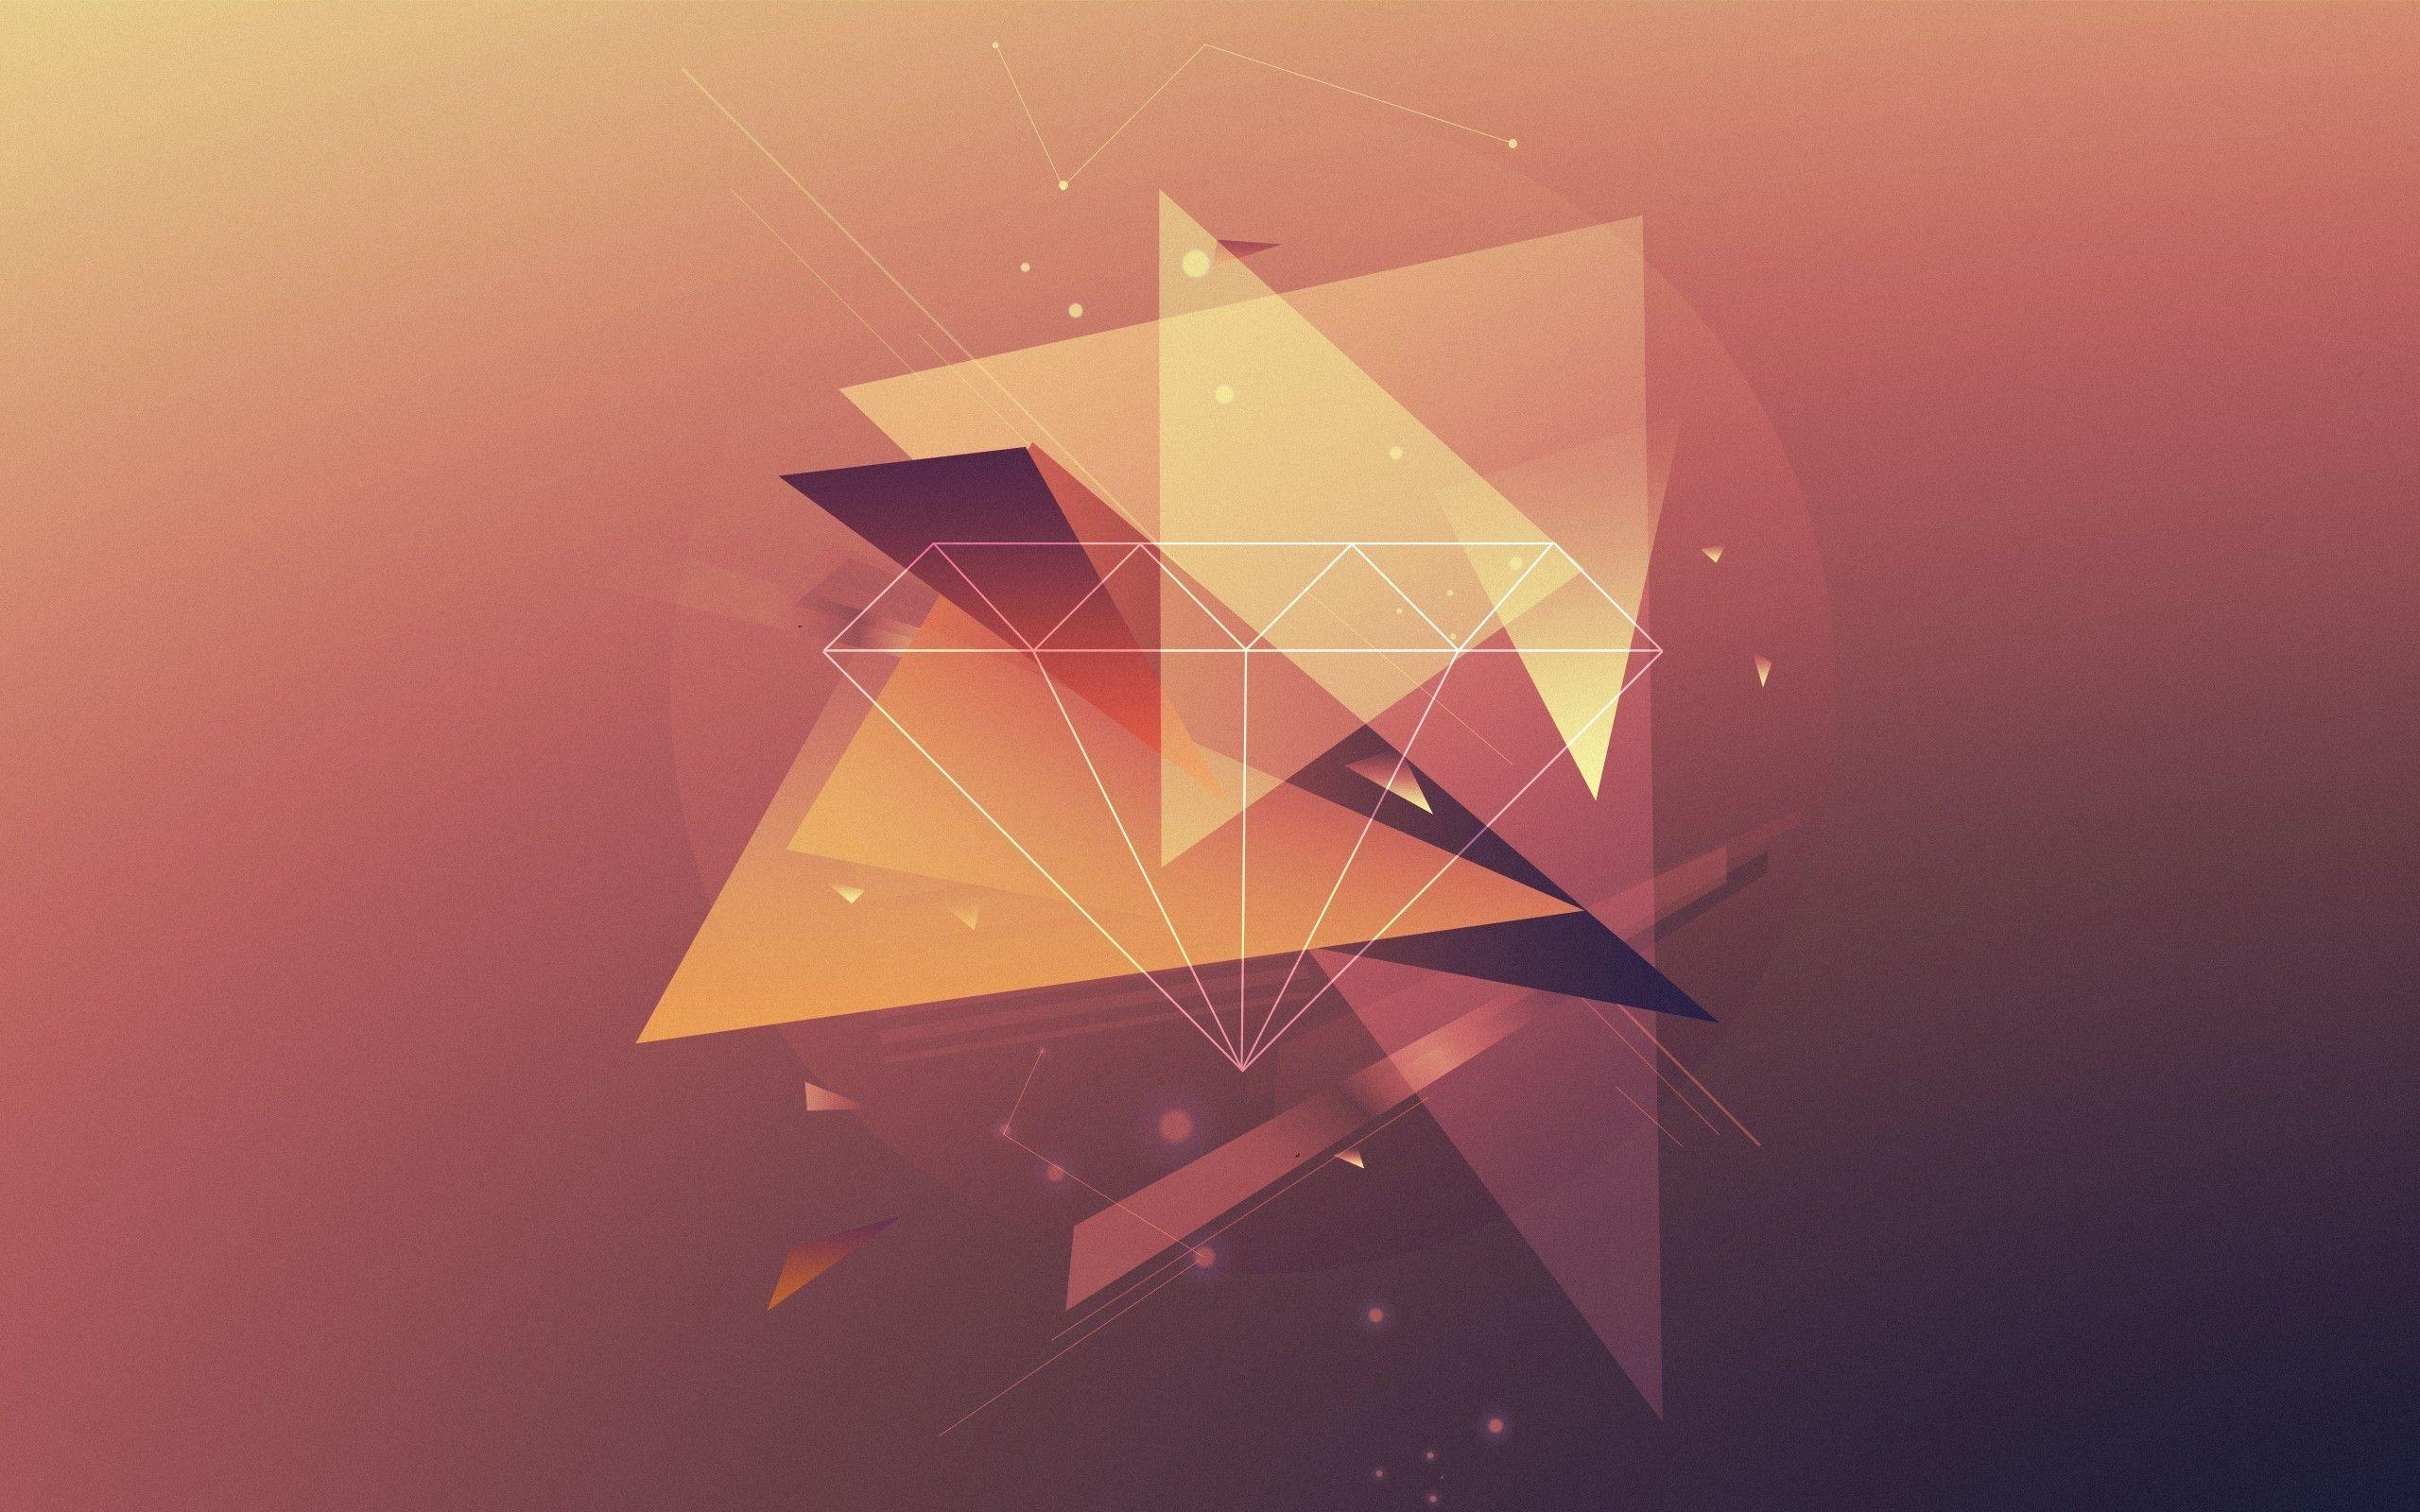 Triangles Wallpaper, HD Image Triangles Collection, FN.NG